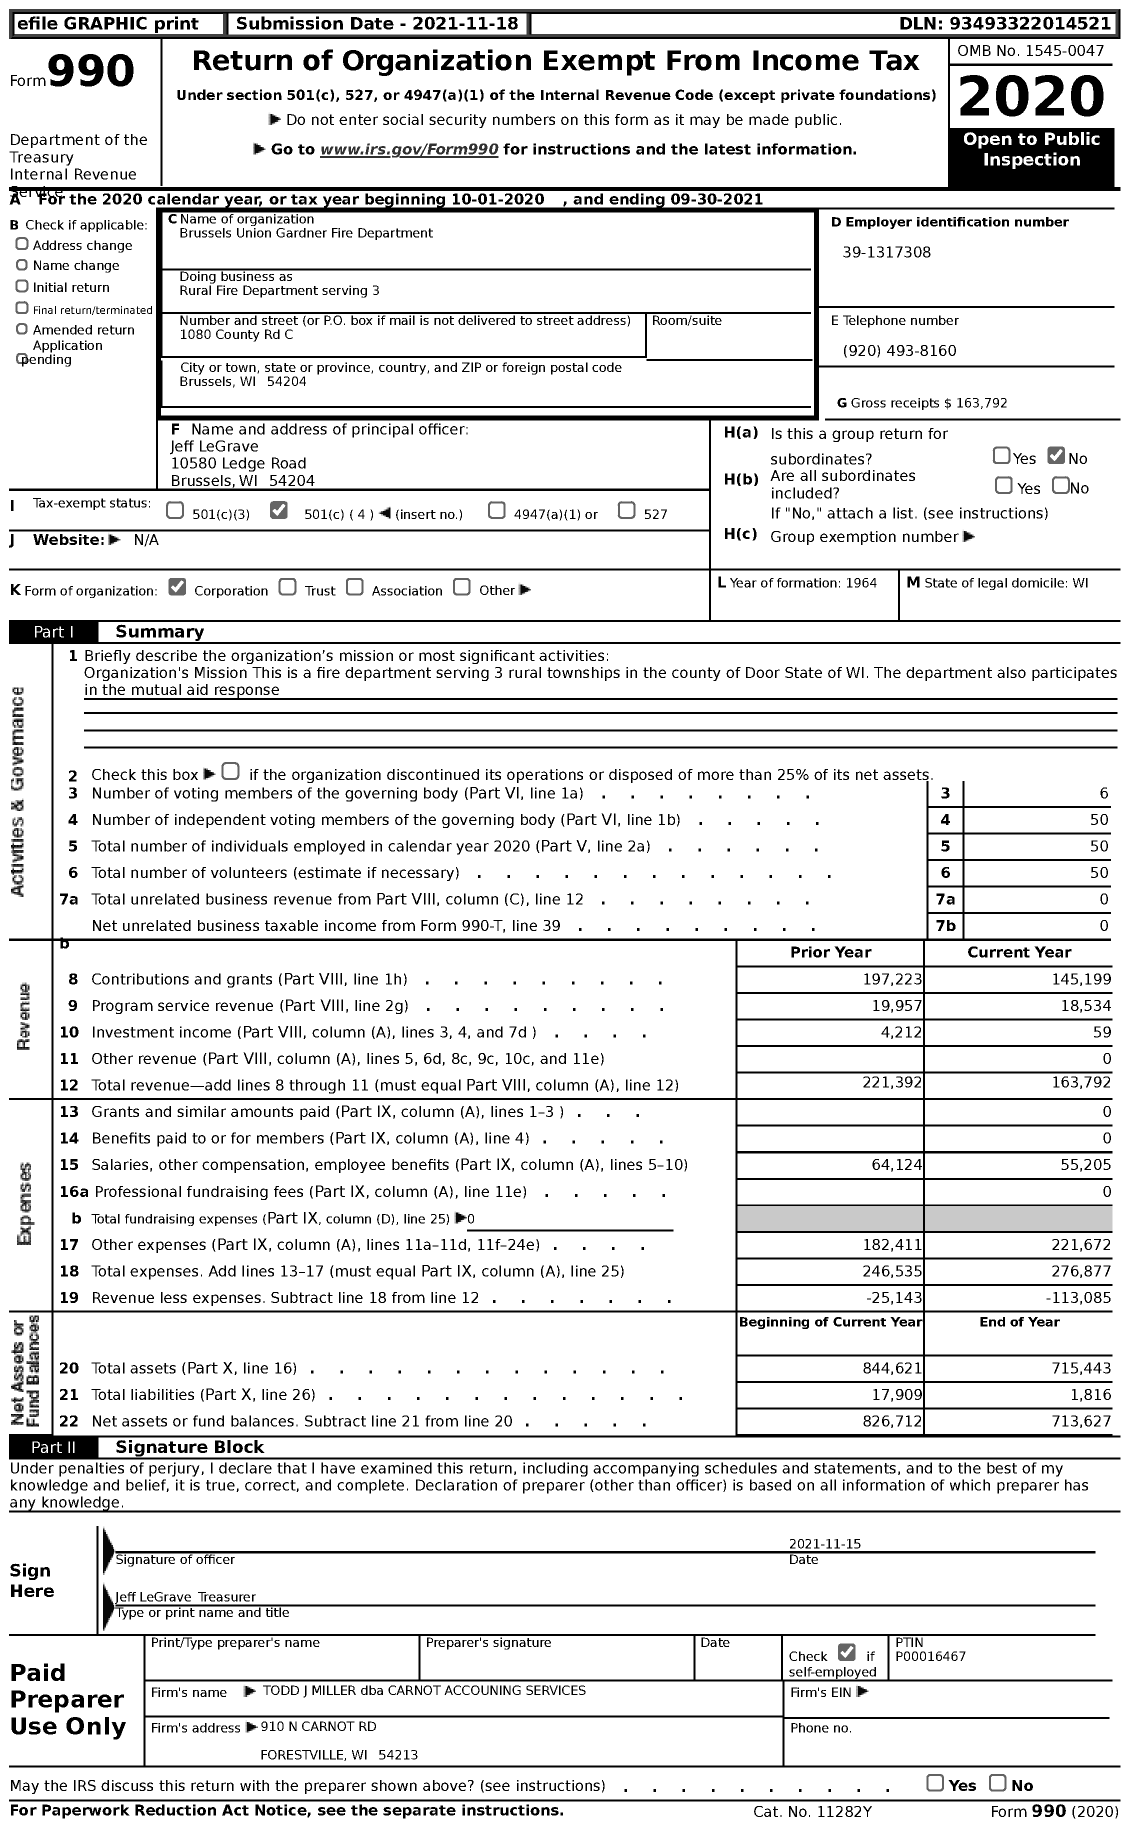 Image of first page of 2020 Form 990 for Rural Fire Department serving 3